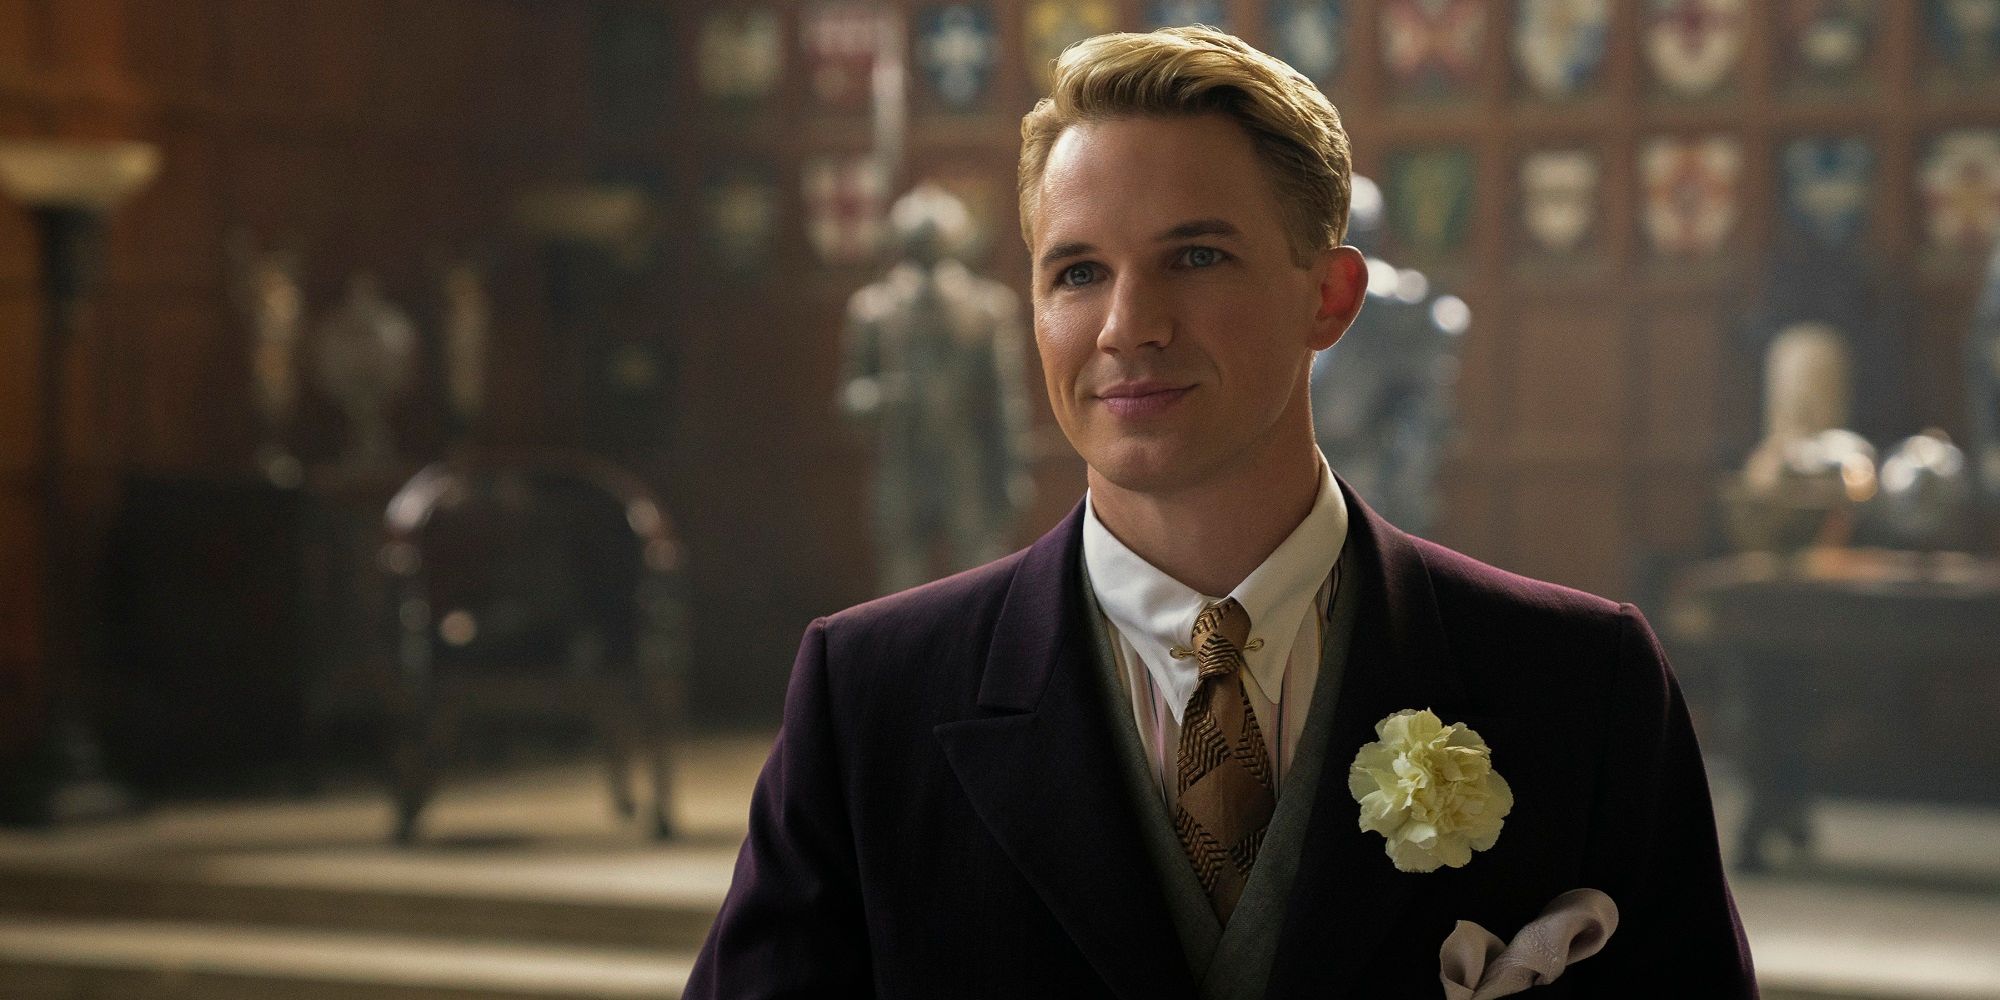 Matt Lanter wears a suit and tie in Jupiter's Legacy.